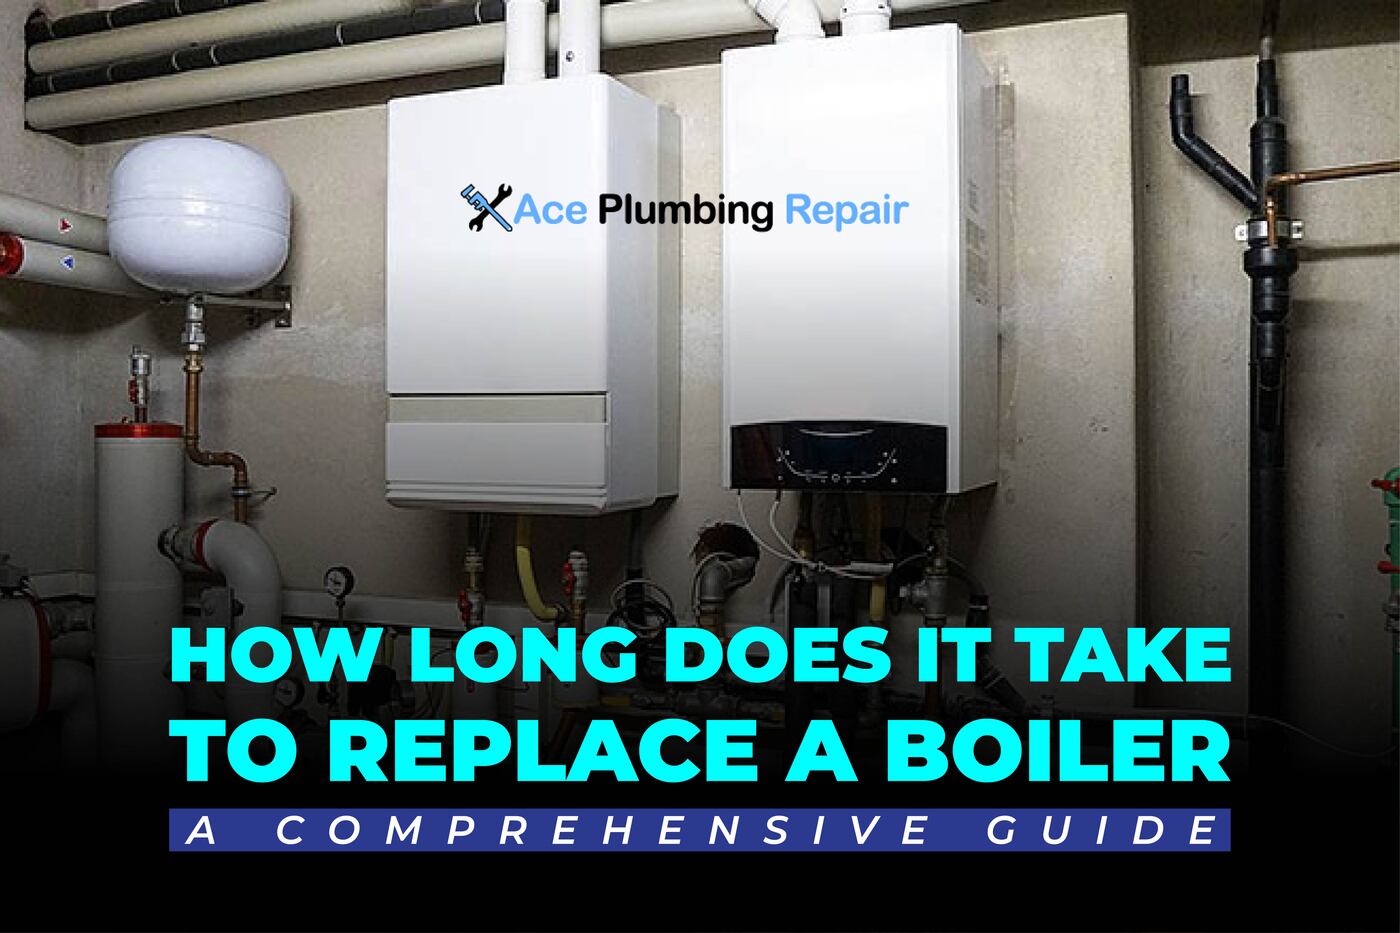 How long does it take for a boiler to heat up?